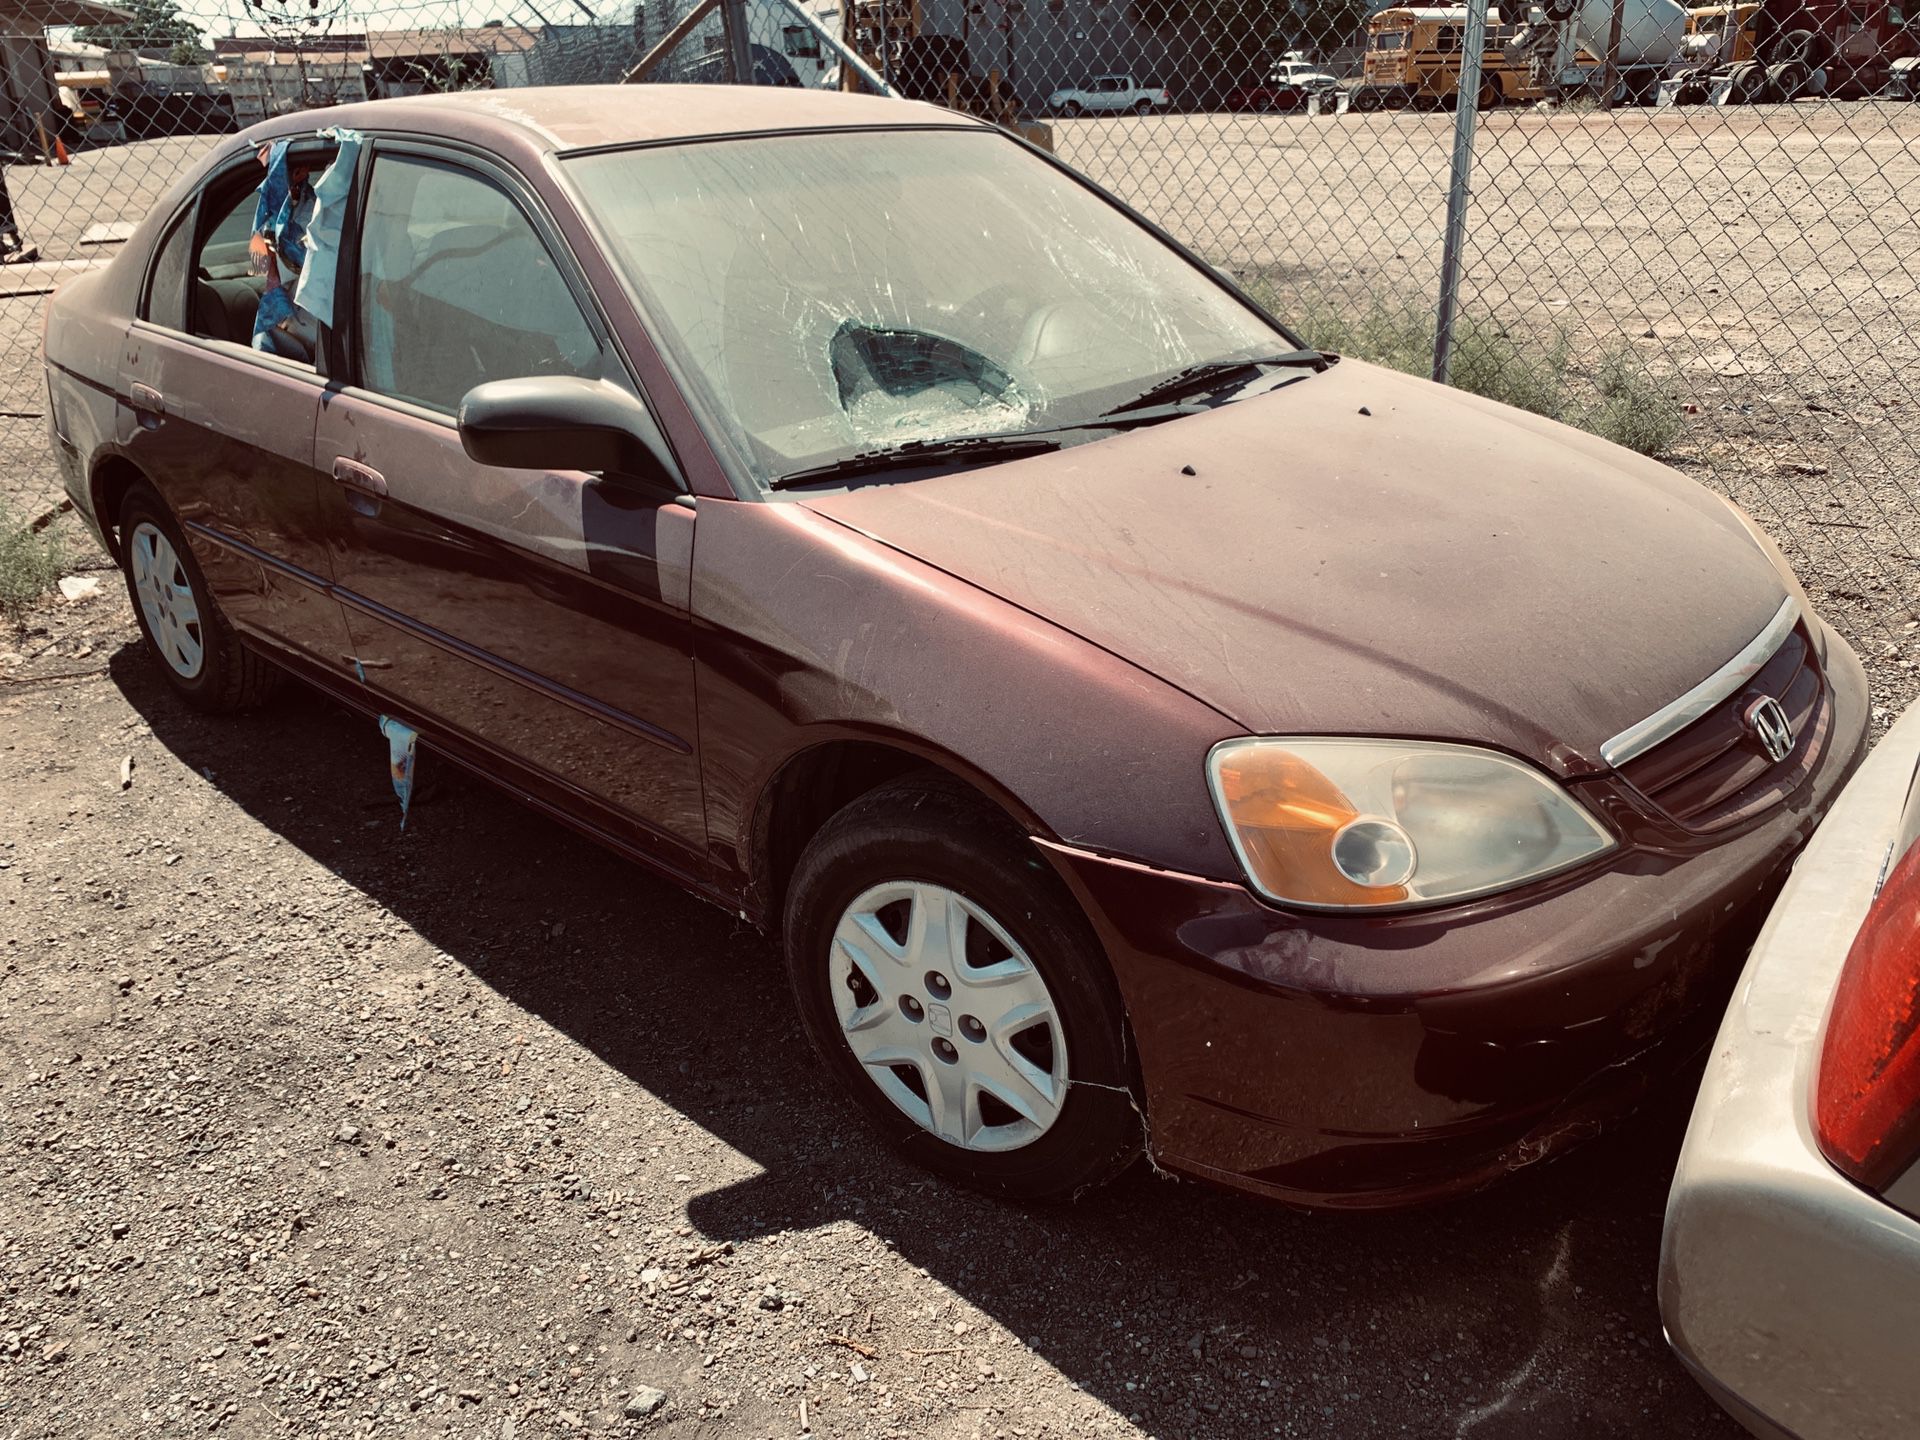 2003 Honda Civic 4cyl auto abandoned and vandalized good for parts no key sold as is where is